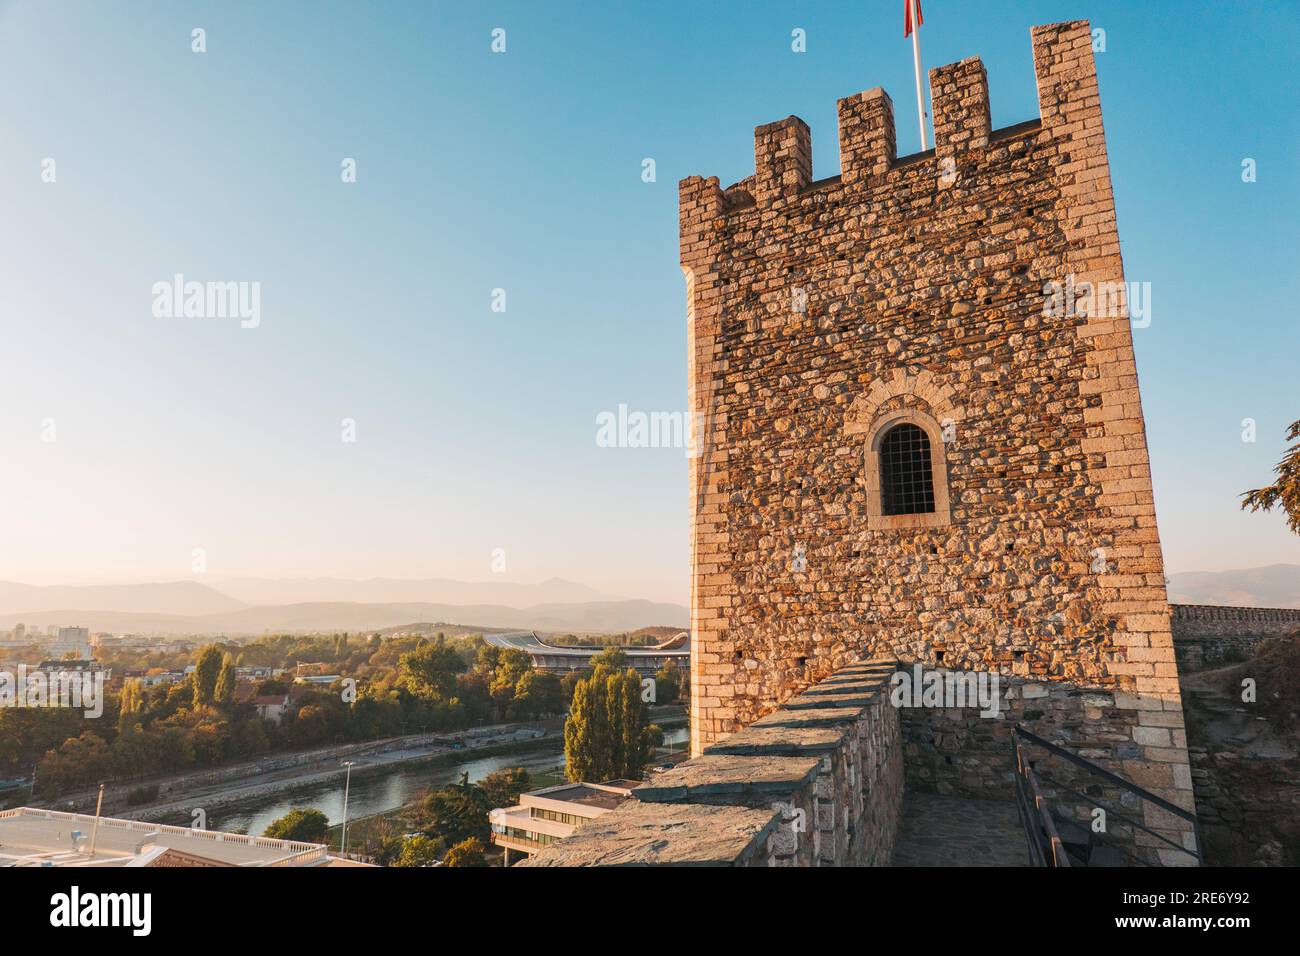 Sun sets on a stone tower at Kale Fortress, Skopje, North Macedonia. The fort's history dates back to 6th century CE. Stock Photo